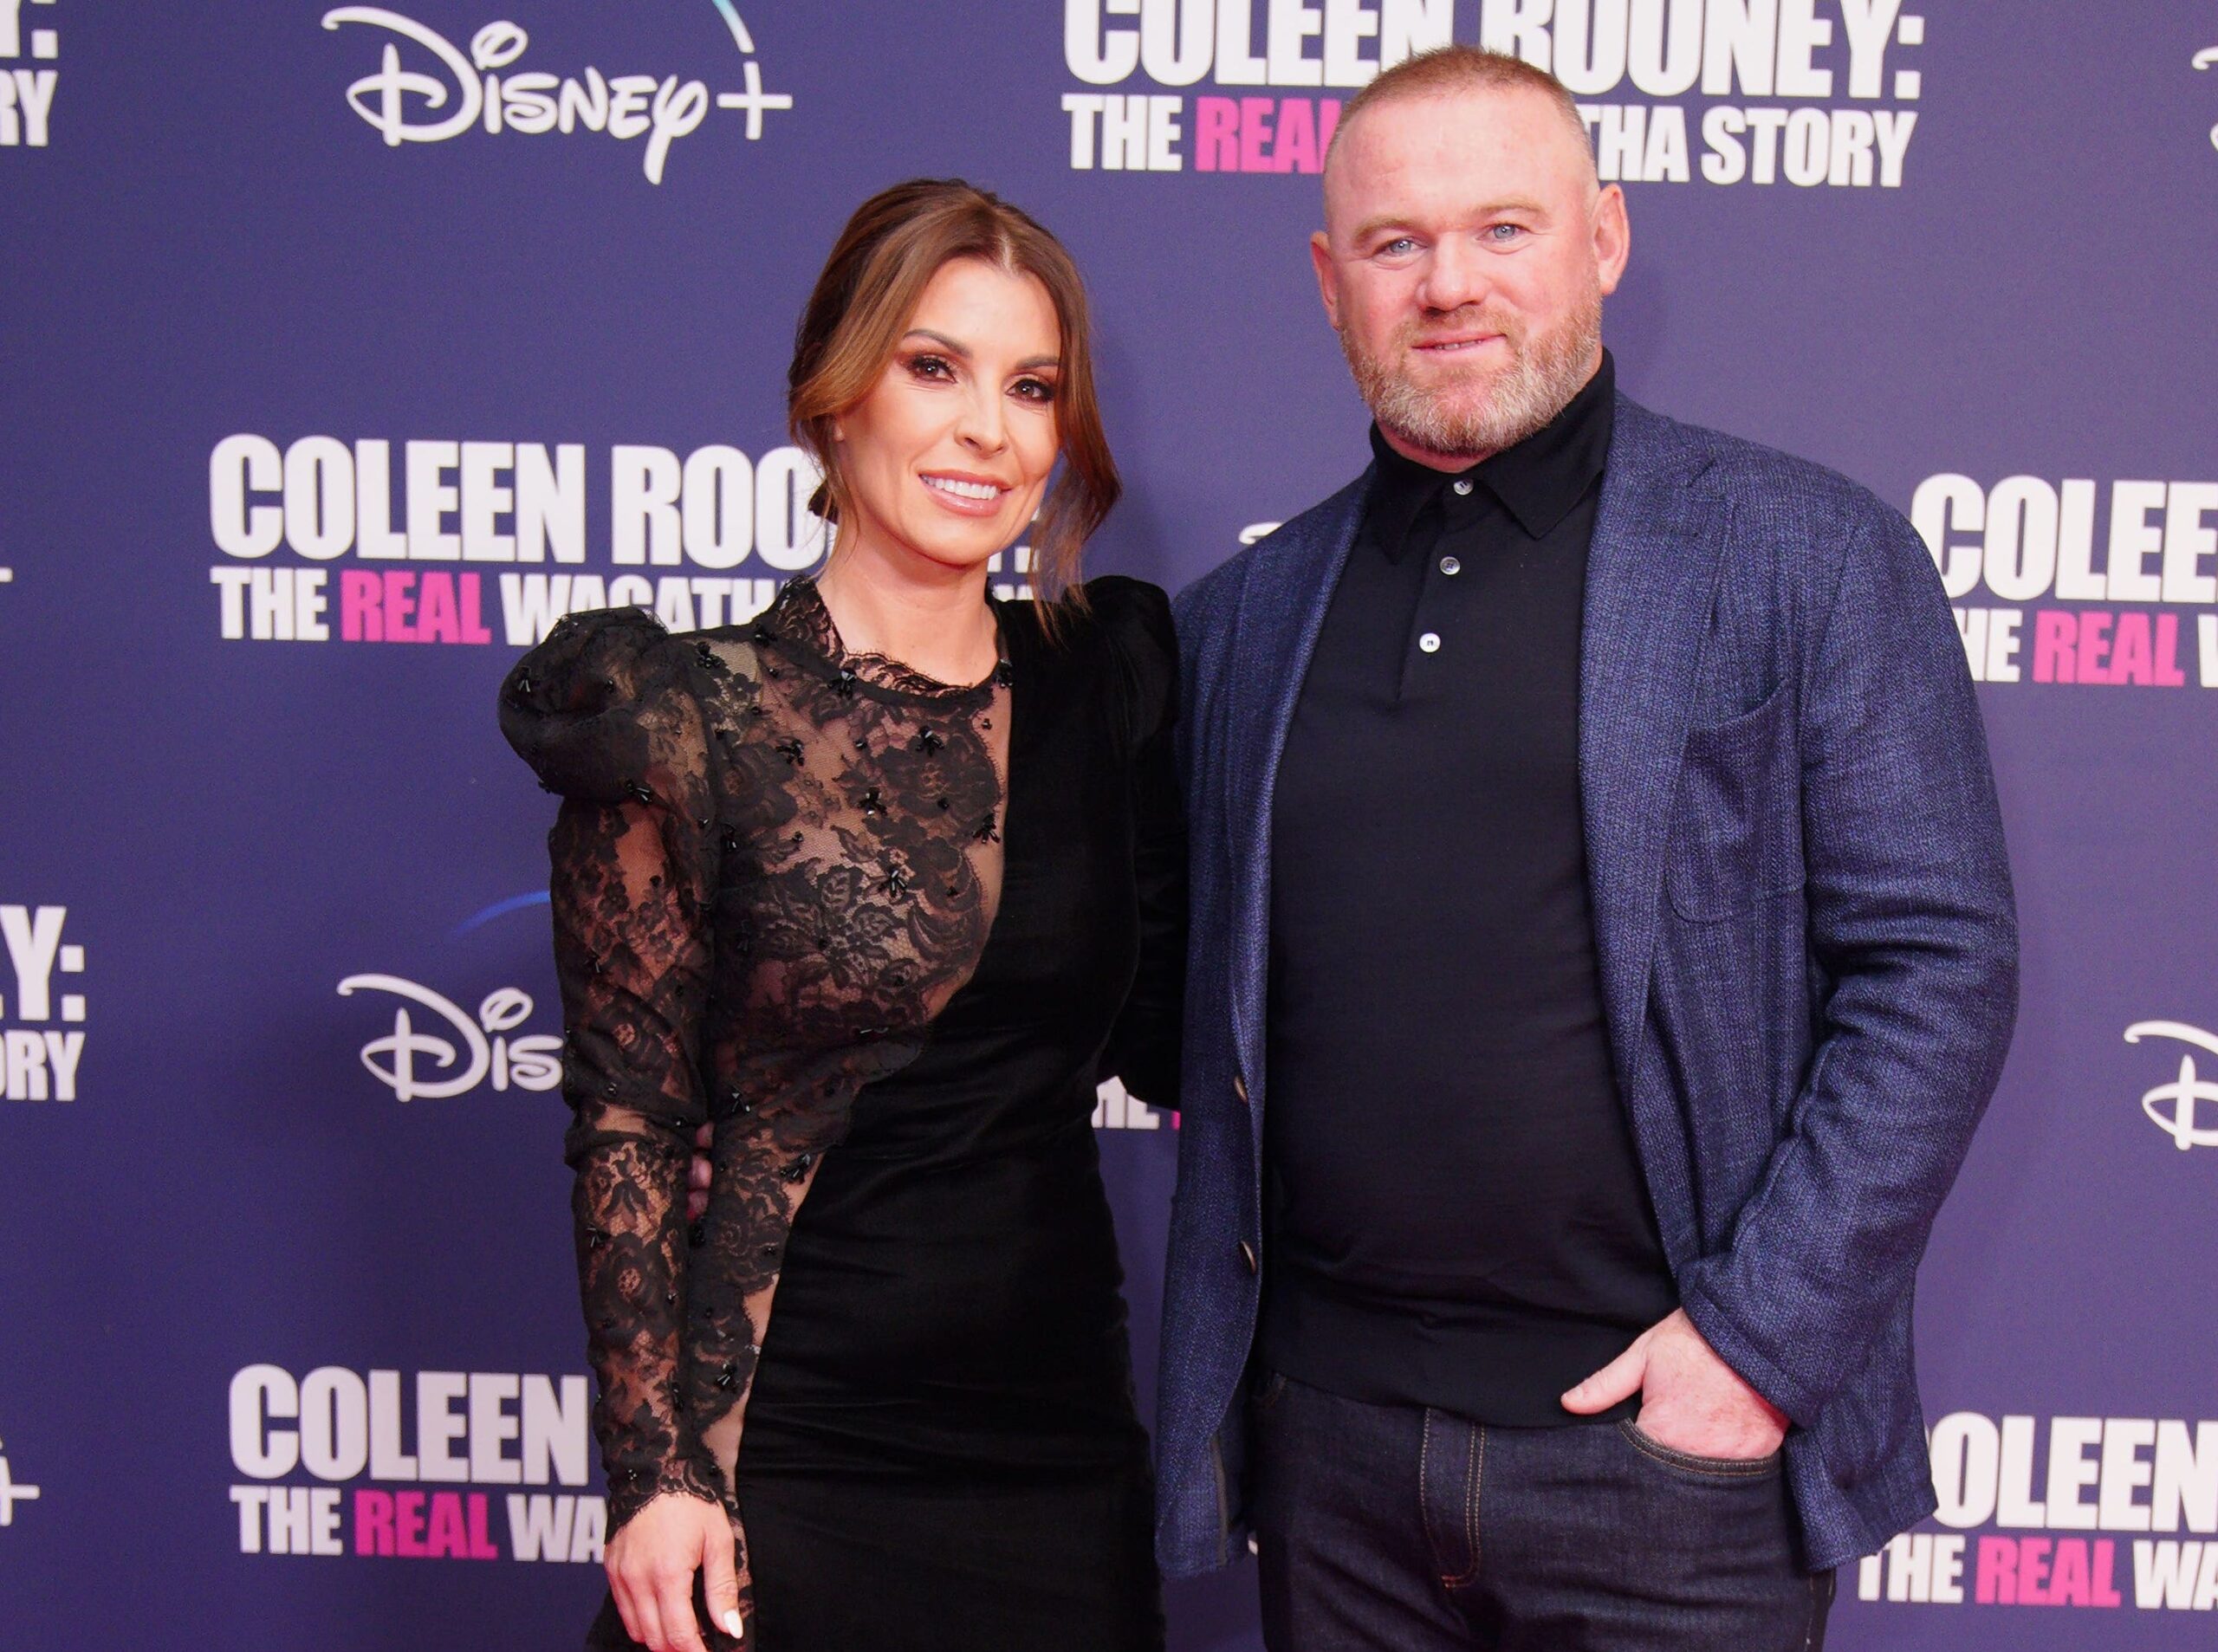 Wayne and Coleen have landed another epic TV deal